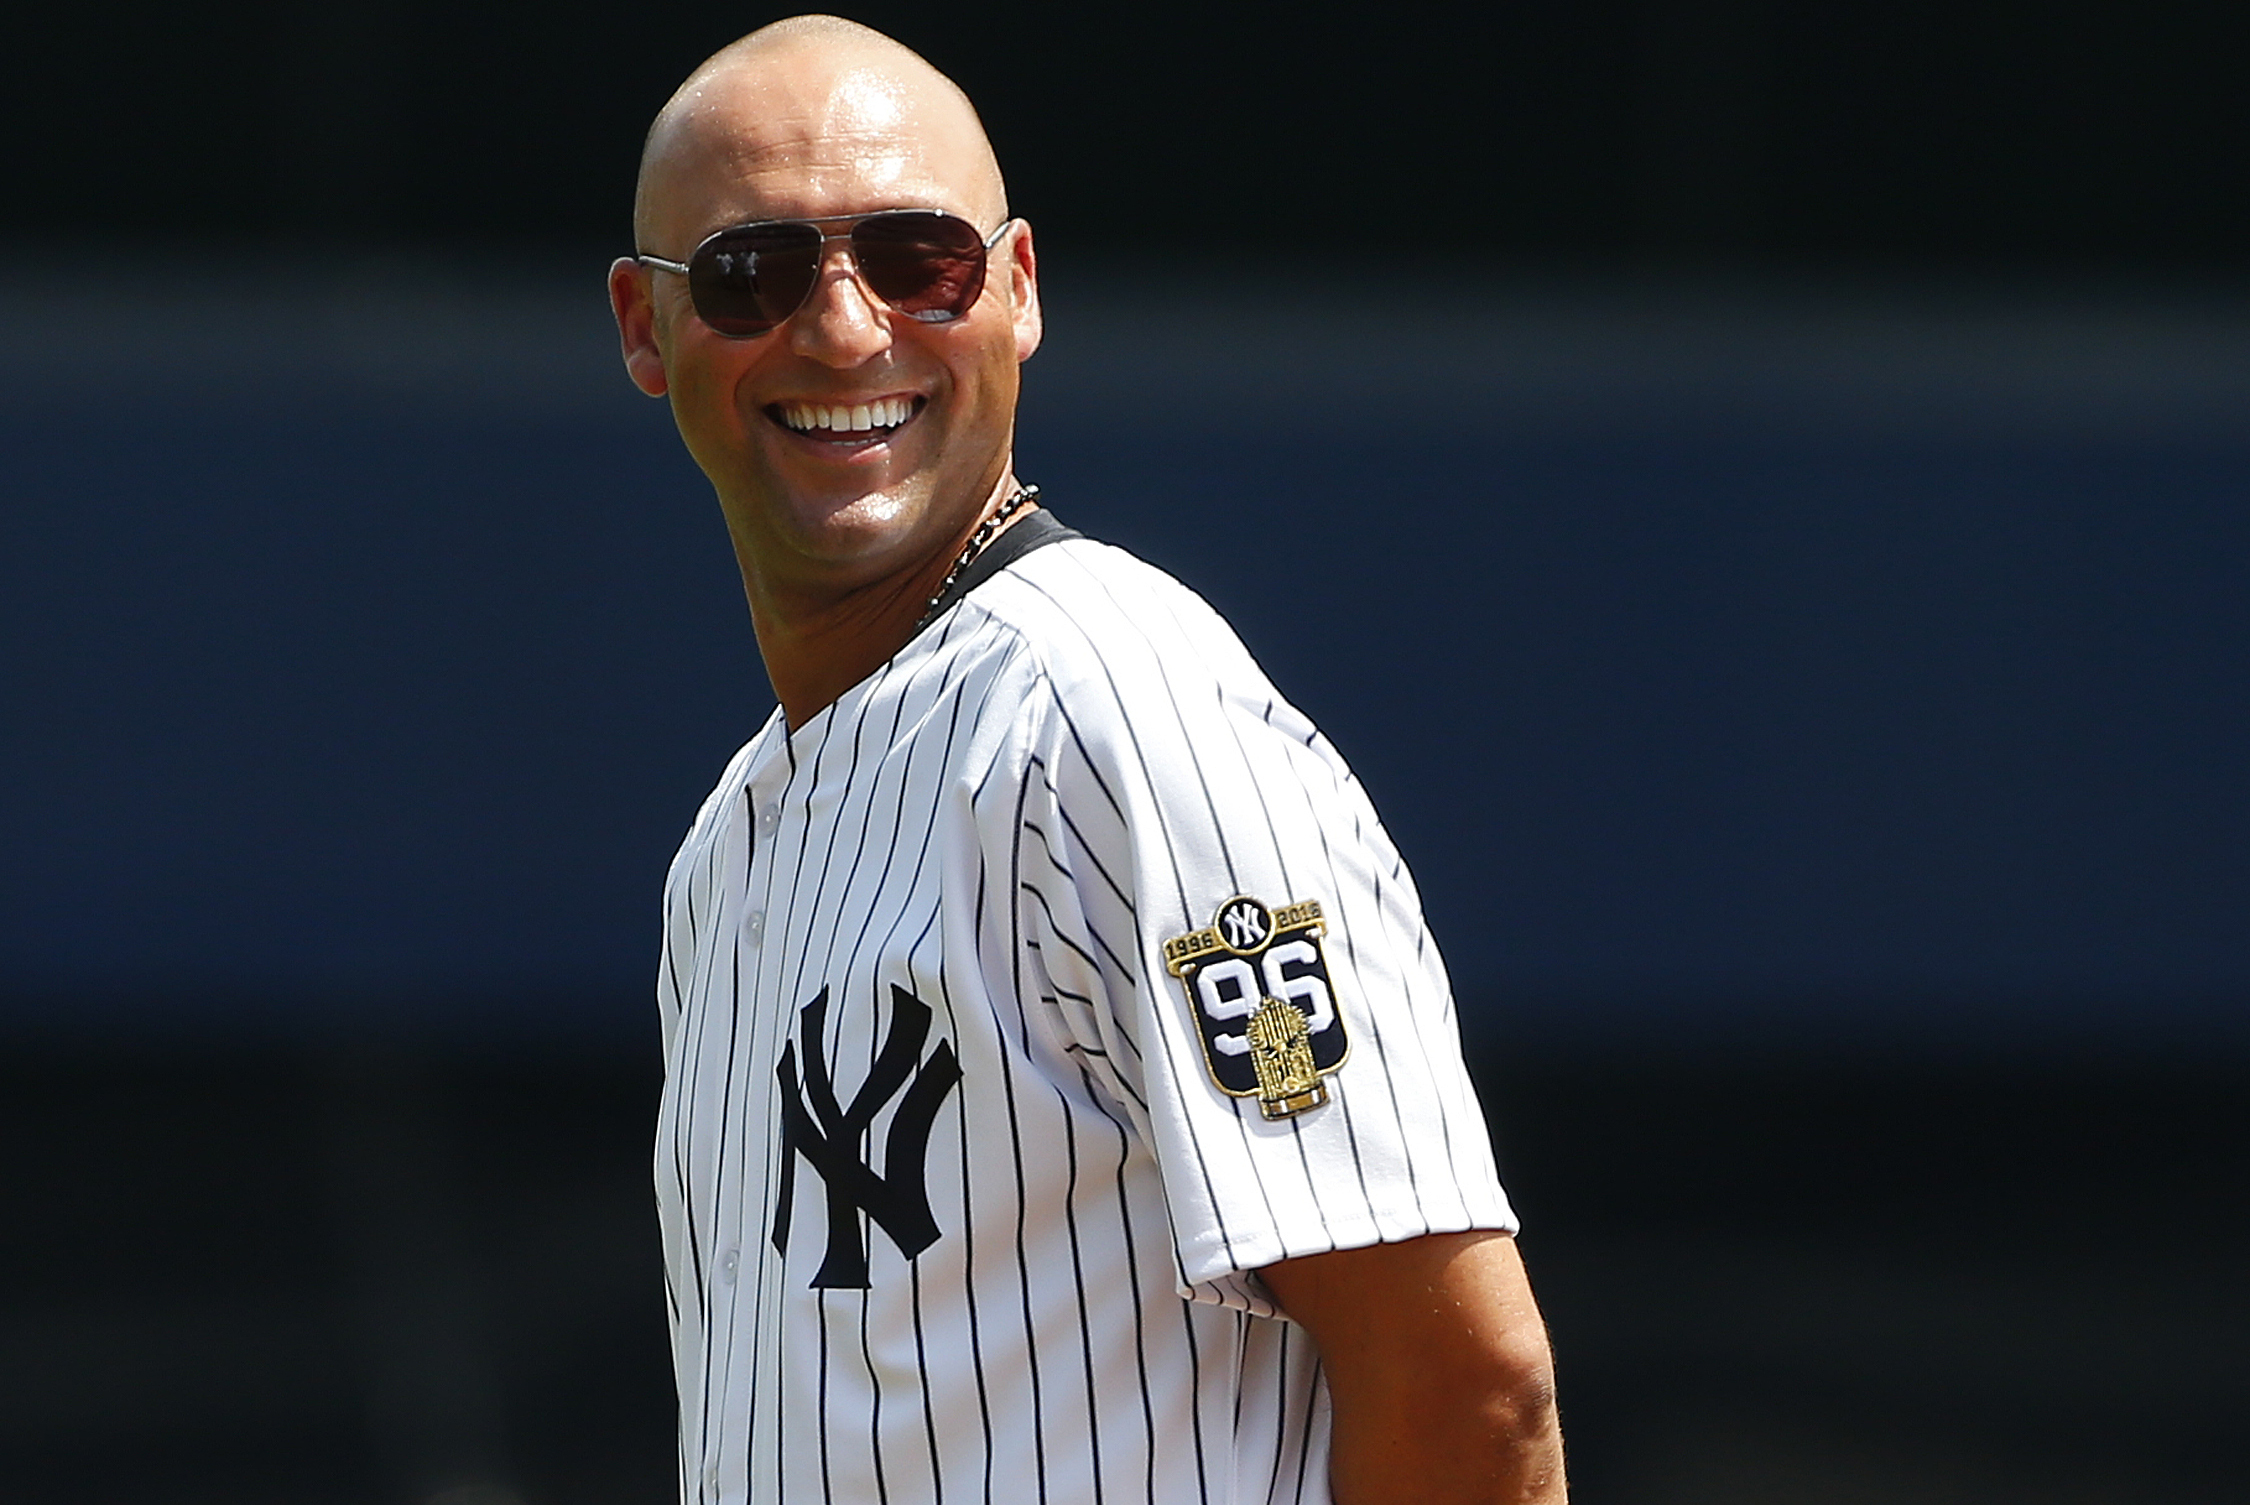 Yankees to retire Derek Jeter's number on May 14 - Sports Illustrated